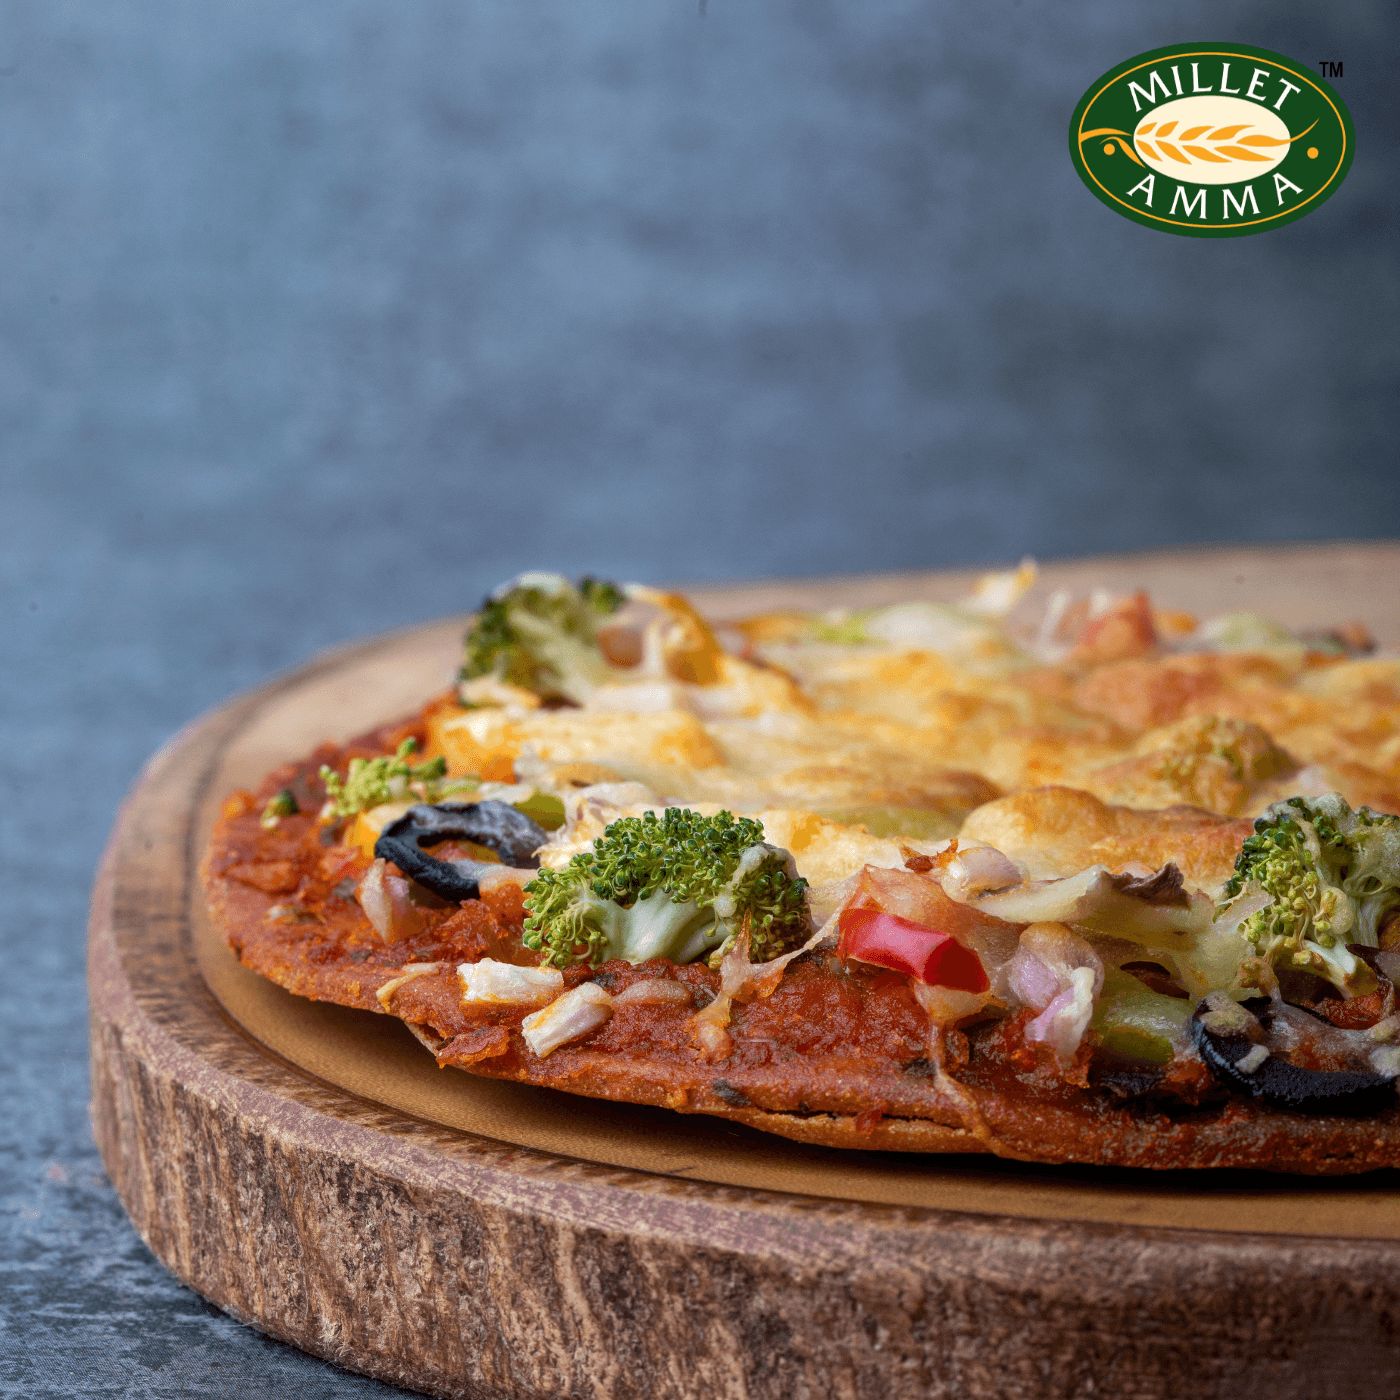 Millet Amma’s Organic Millet Pizza Base- Finally a guilt free pizza. Introducing to you the only pizza base in India that is made from millets, introducing to you our delicious Organic Millet Pizza Base.  Our pizza base is pre-baked, does not contain any yeast, baking soda or chemical leaveners and is free from preservatives. It is suitable for all ages.